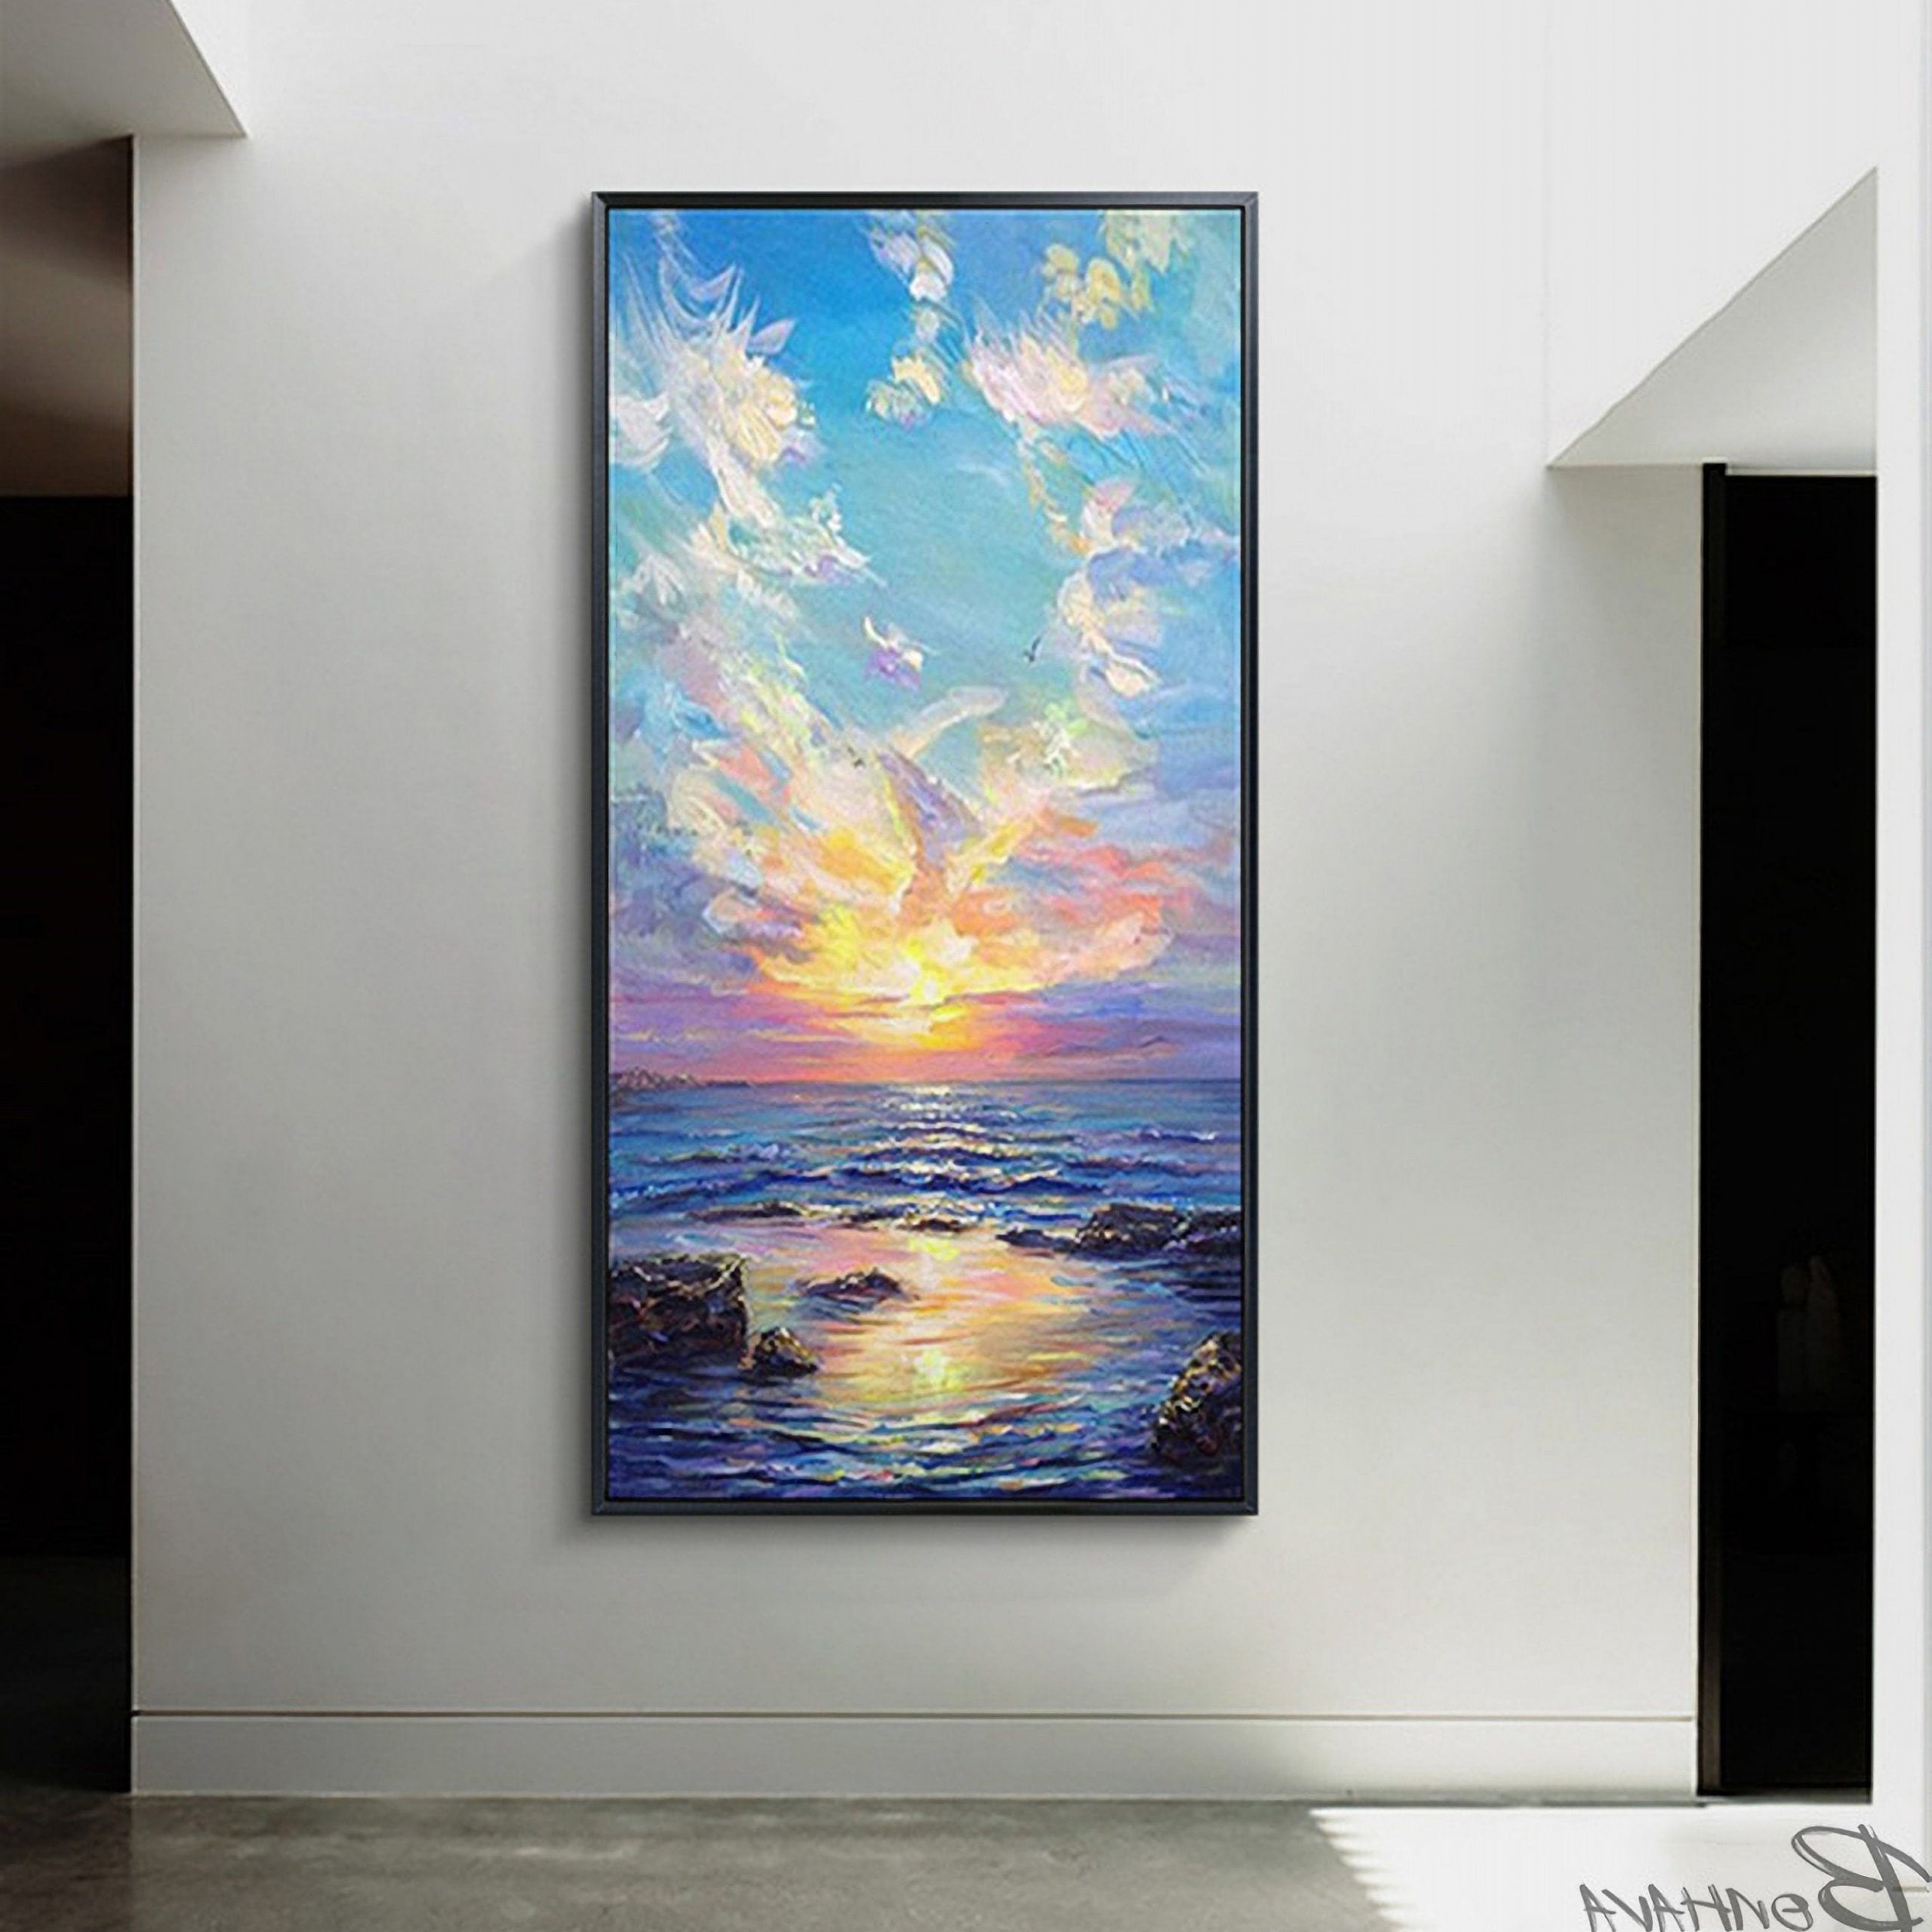 Most Popular Sunrise Wall Art With Regard To Sea Spray And Sunrise Wall Art Ocean Oil Painting On Canvas – Etsy France (View 5 of 15)